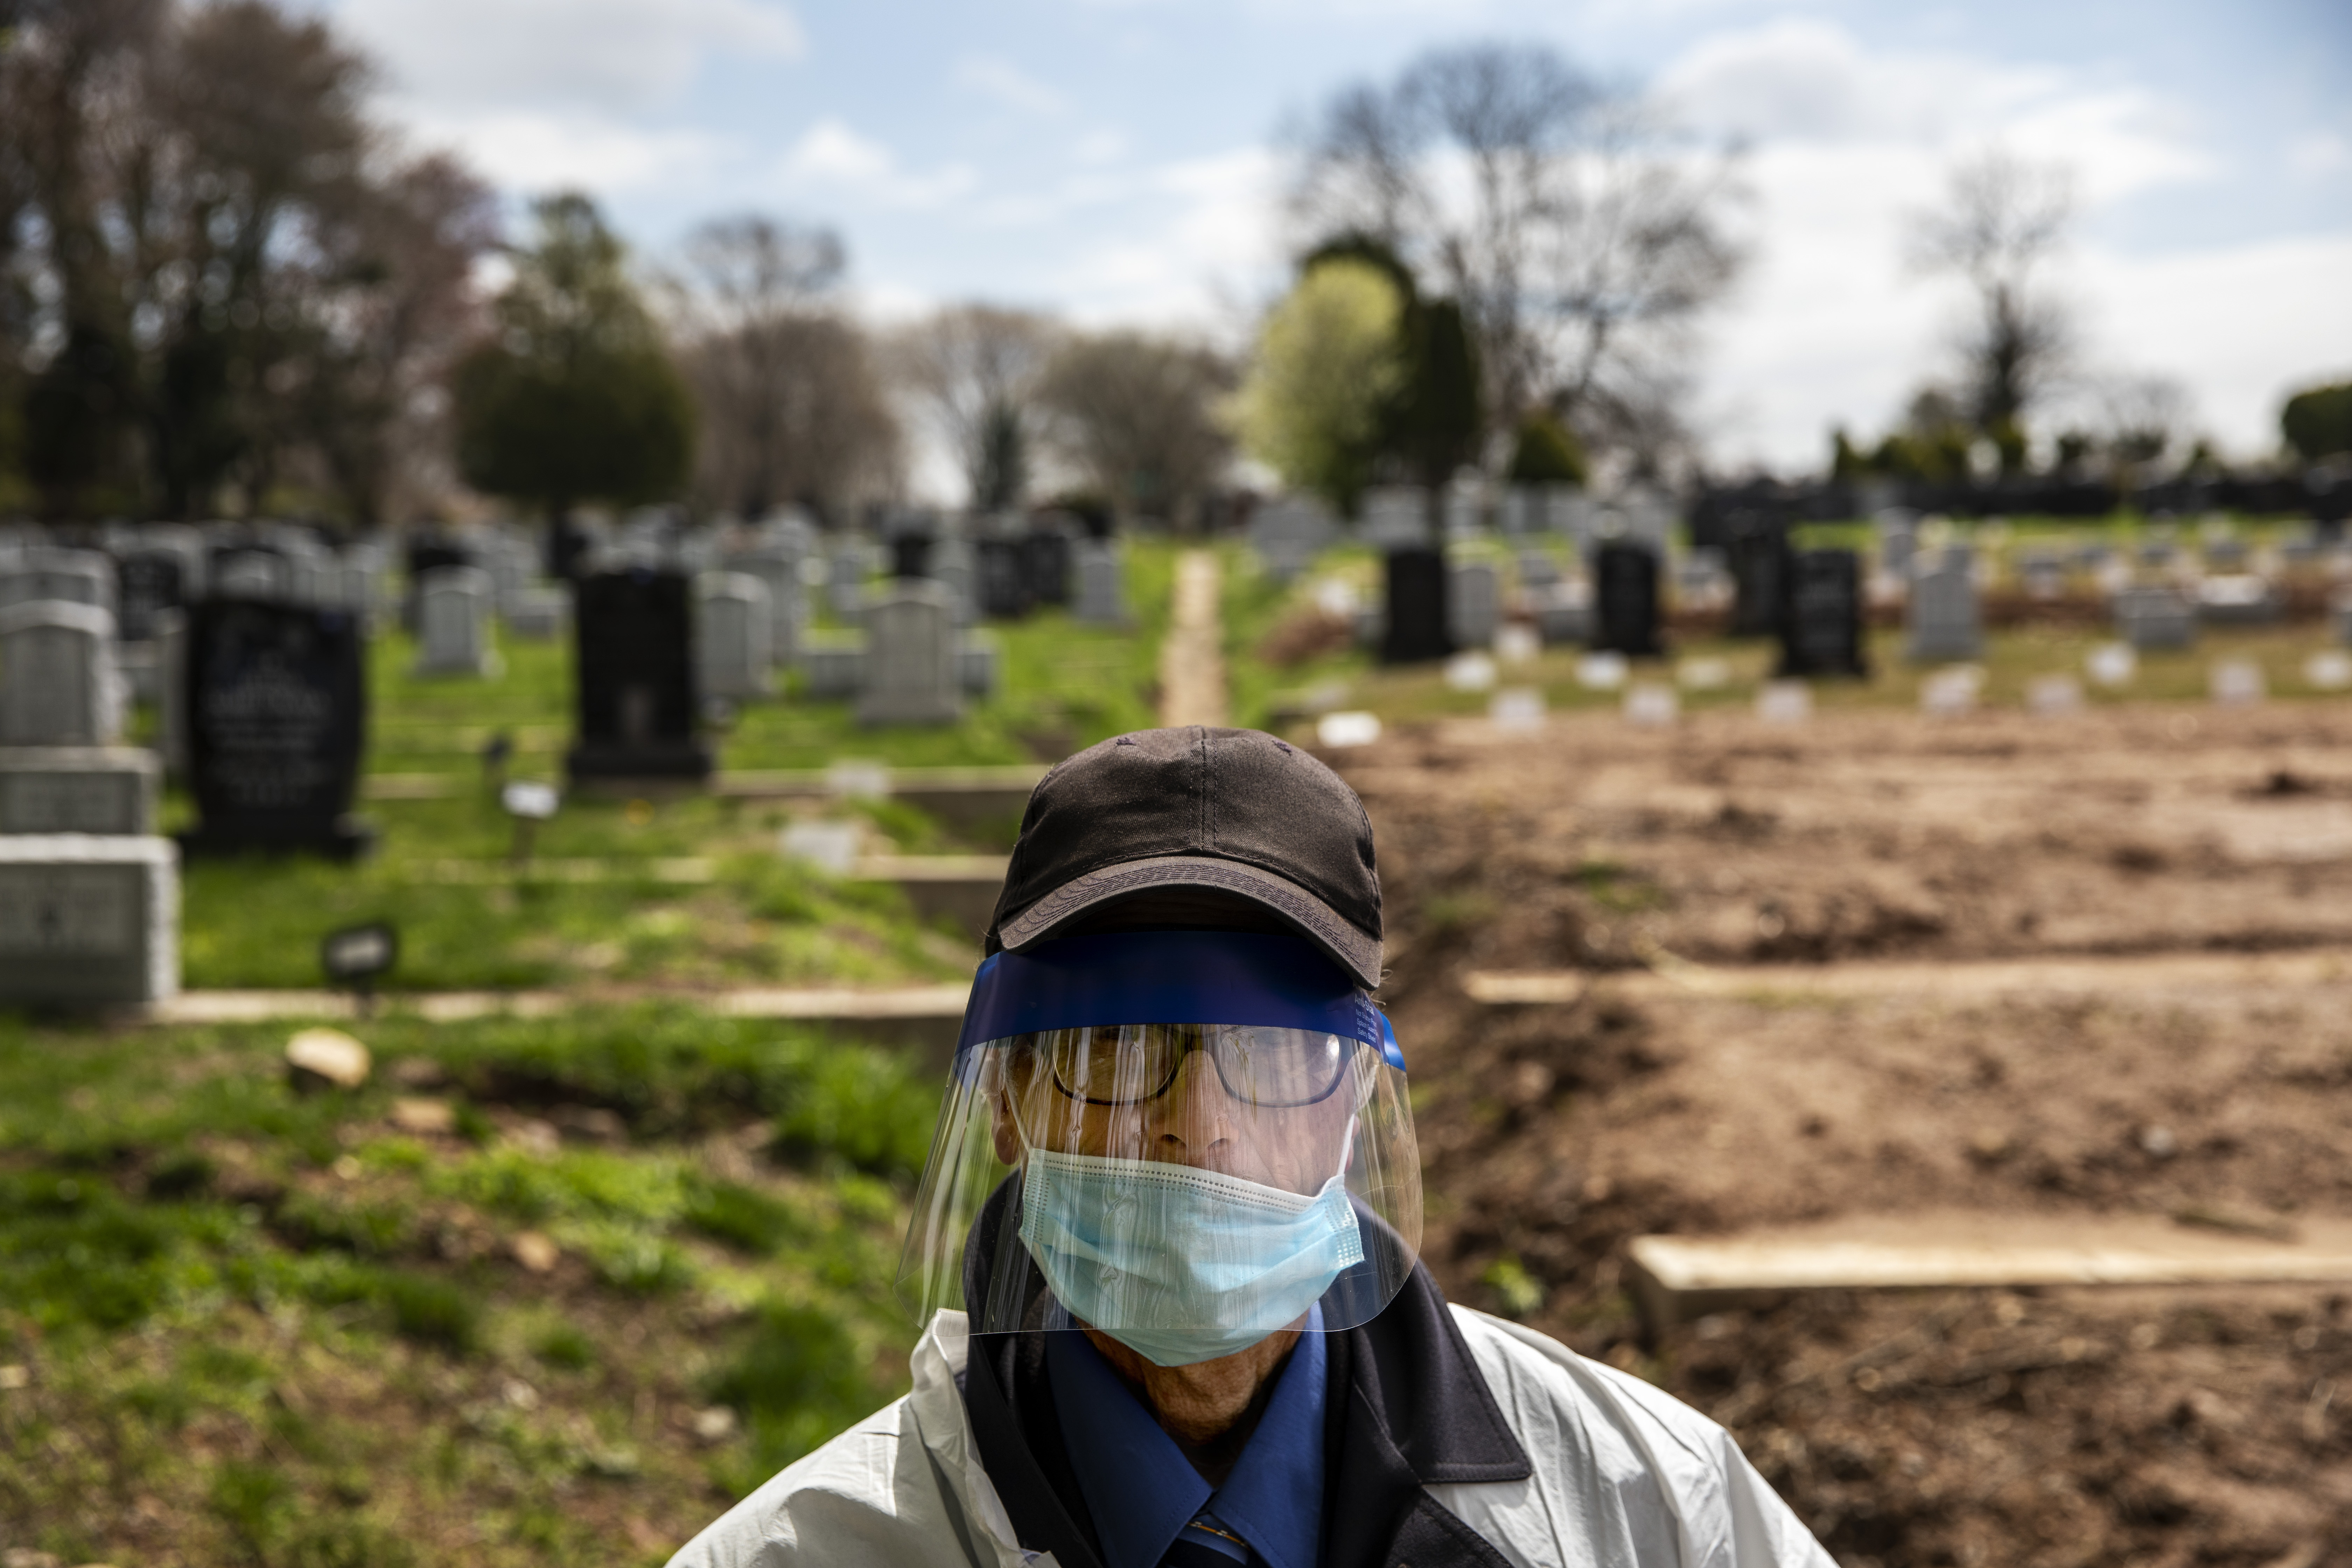 Rabbi Shmuel Plafker walks through Mount Richmond Cemetery after conducting burials of mostly coronavirus victims in the Staten Island borough of New York, Wednesday, April 8, 2020. As the world retreats and the pandemic's confirmed death toll in New York City alone charges past 10,000, funeral directors, cemetery workers and others who oversee a body's final chapter are sprinting to keep up. (AP Photo/David Goldman)